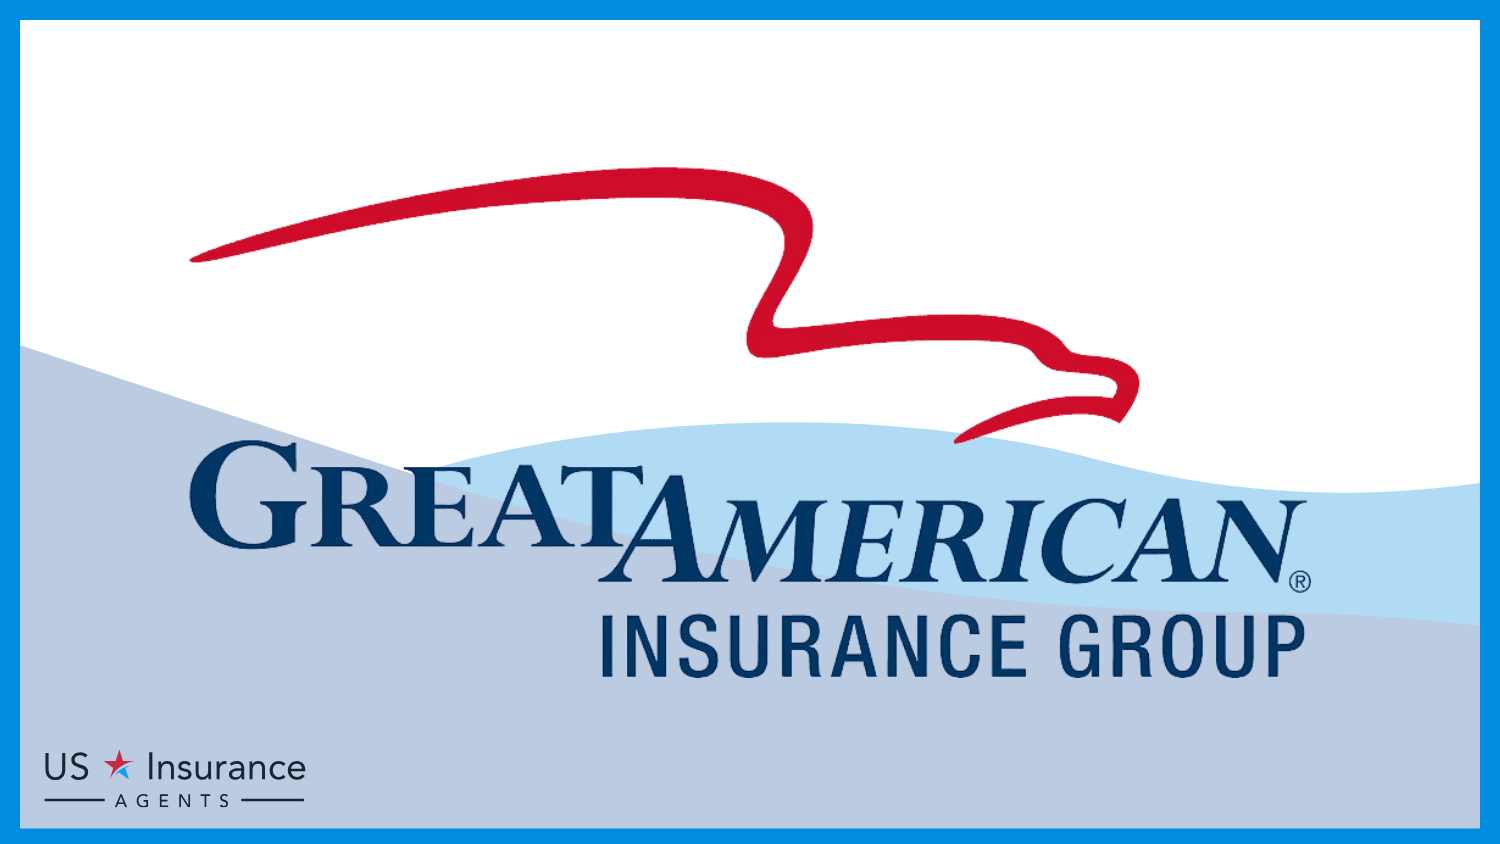 Great American: Best Business Insurance for Equine Therapy Companies